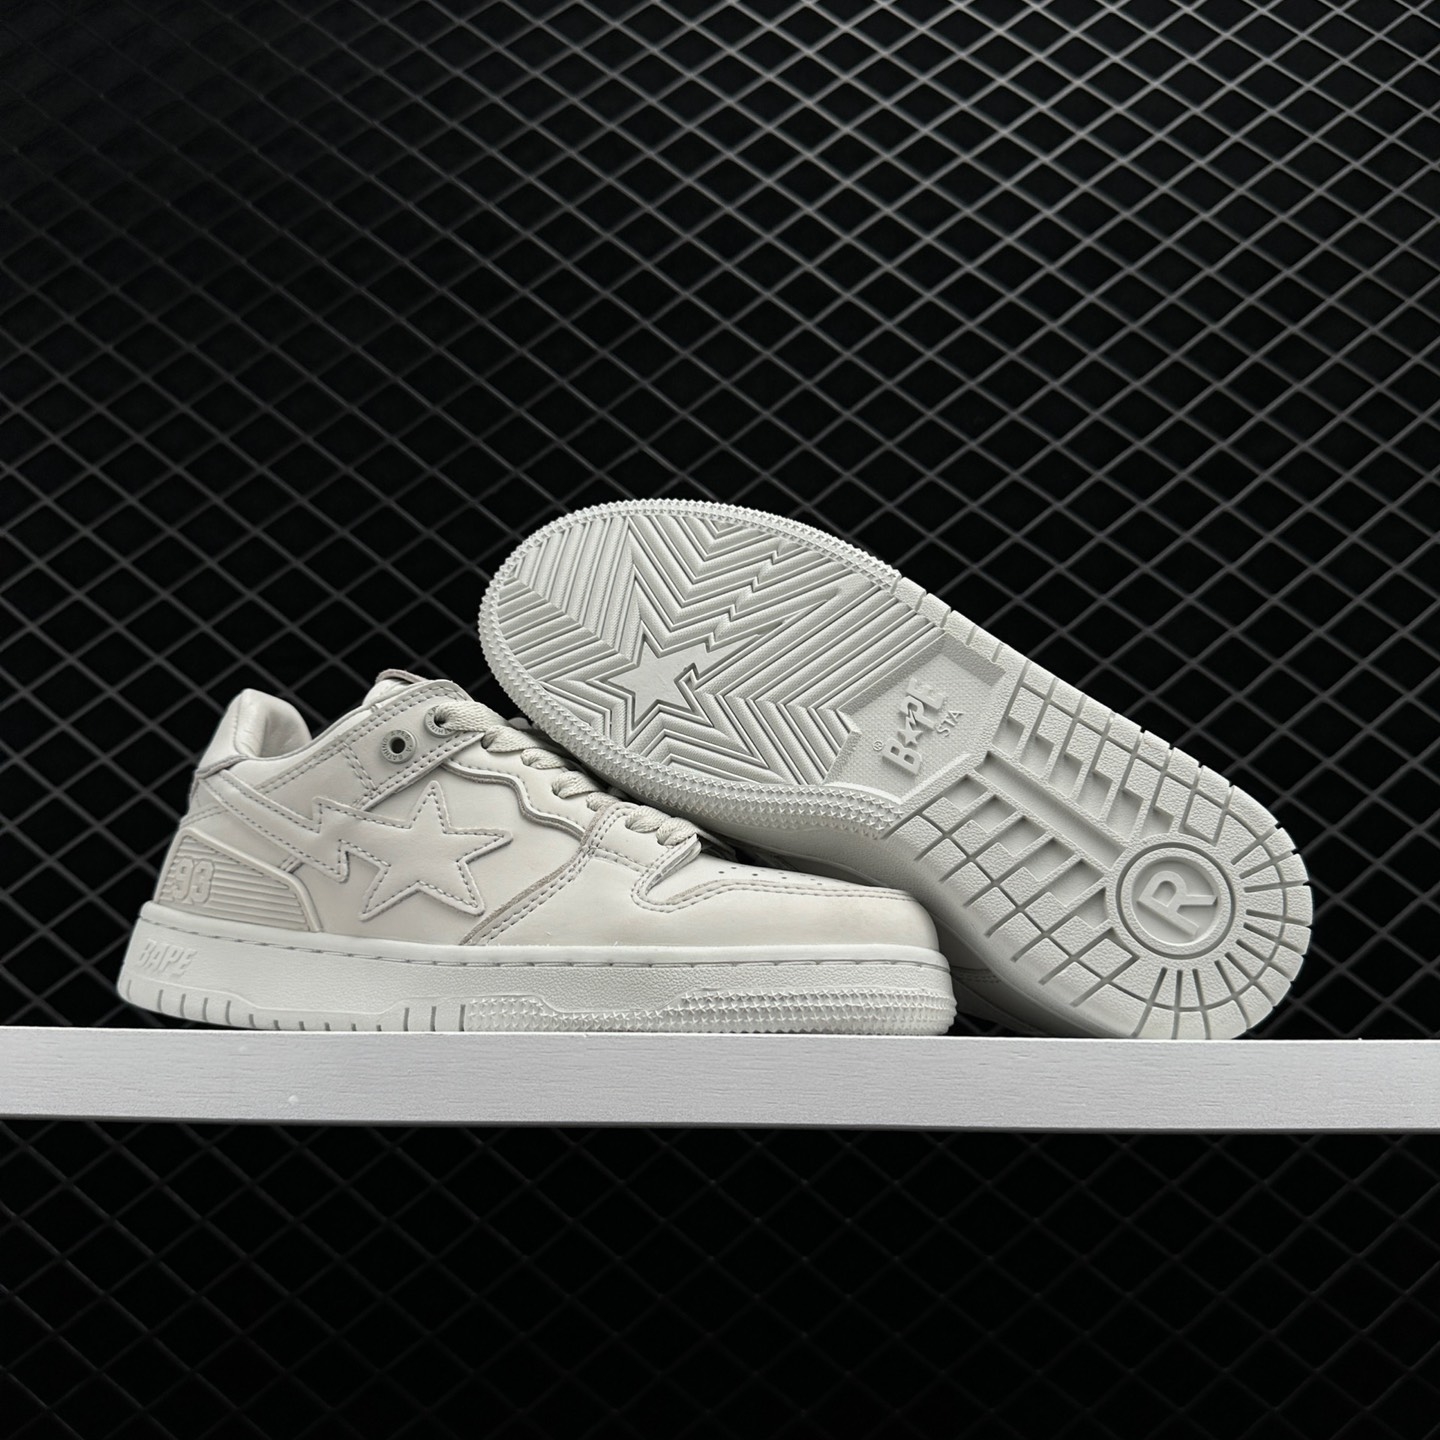 A BATHING APE Bape Sk8 Sta Urban Fall White Shoes | Limited Edition Urban Sneakers